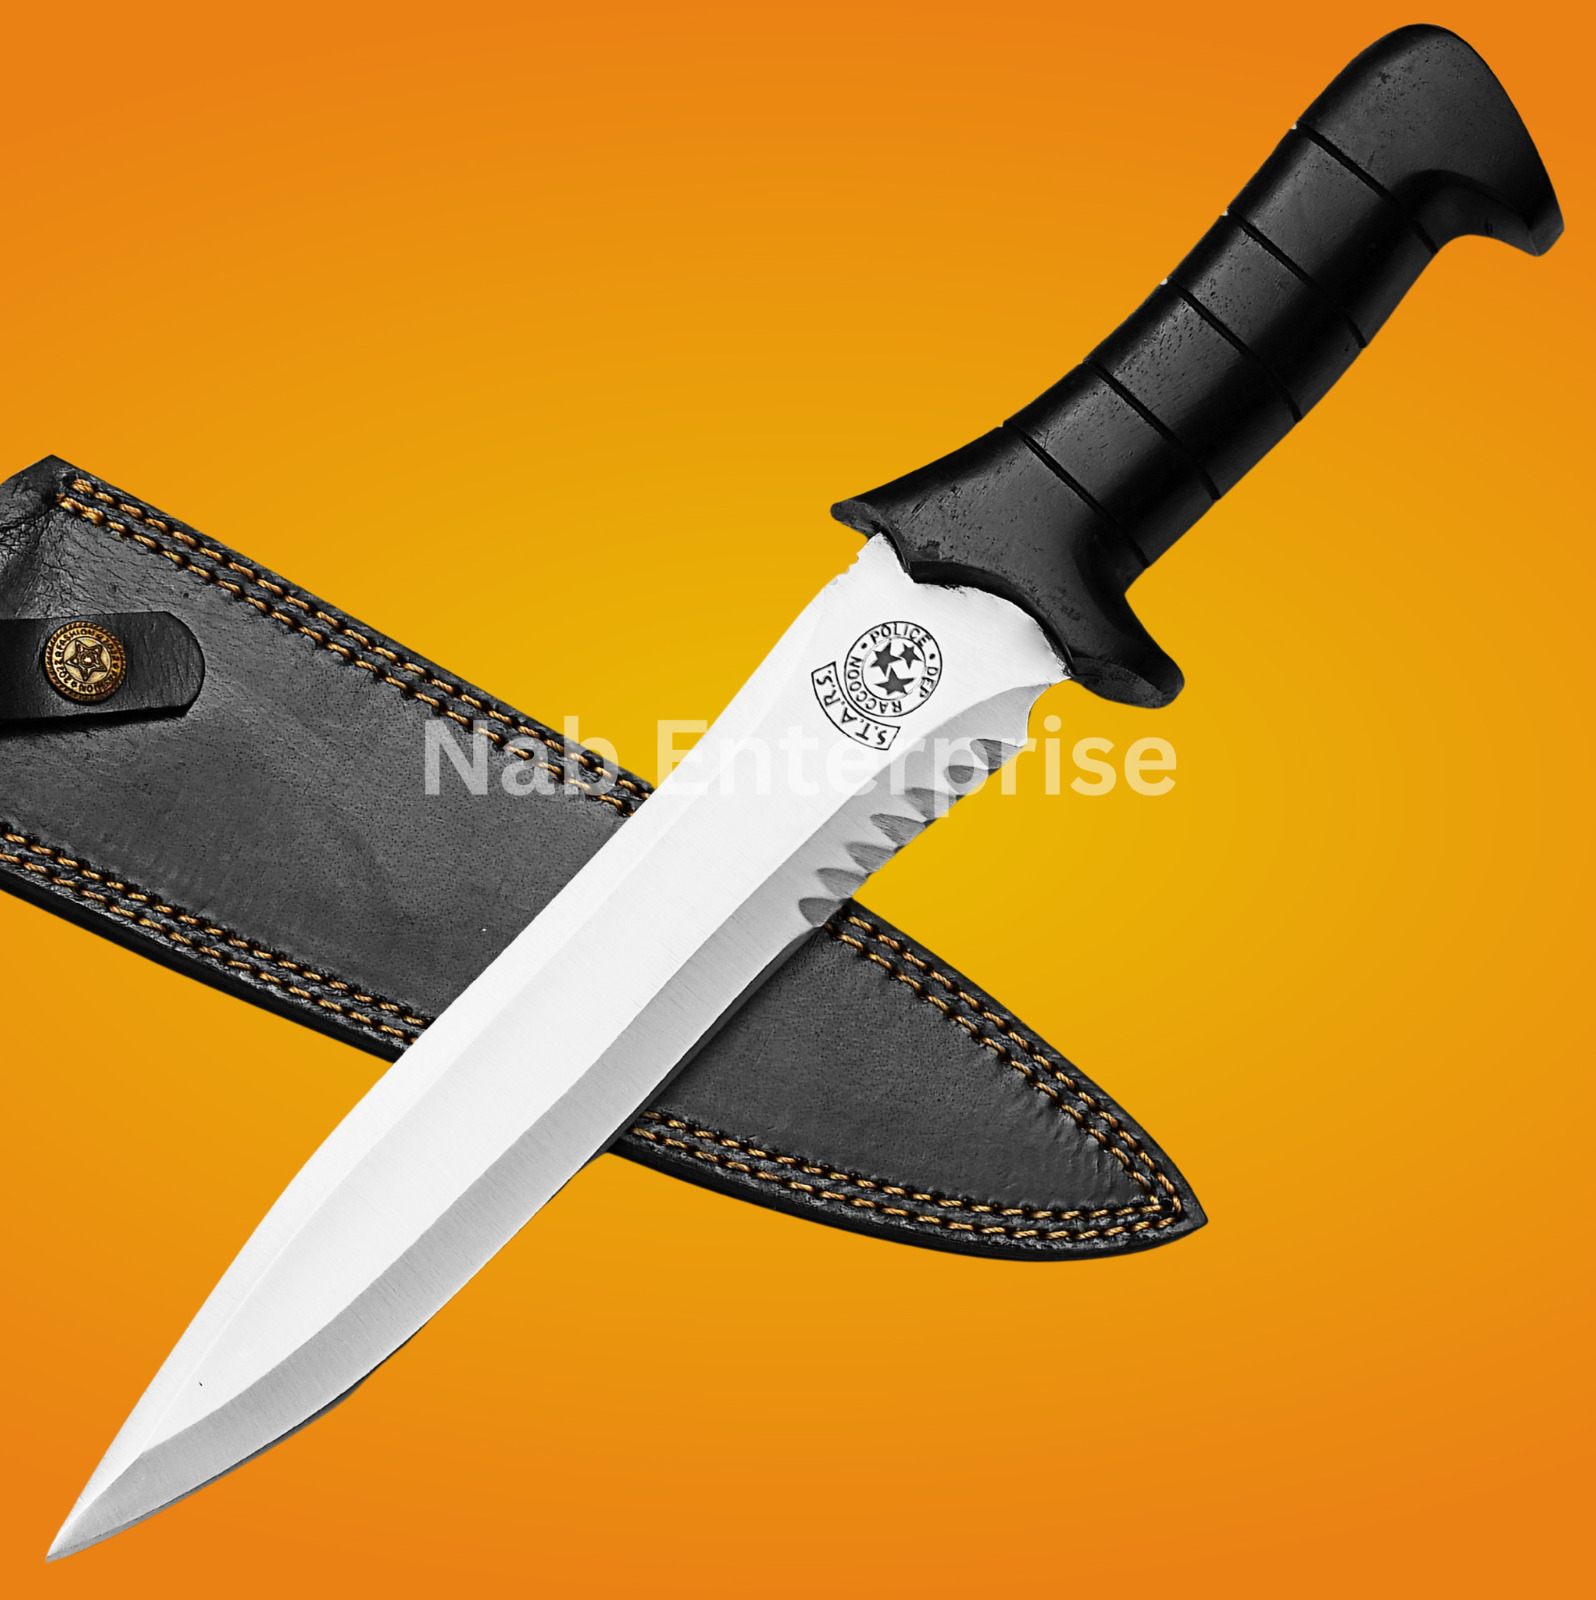 Handmade 5160 Spring Steel RE4 Leon Kennedy\'s Knife,Bowie knife,Tactical Knife 2